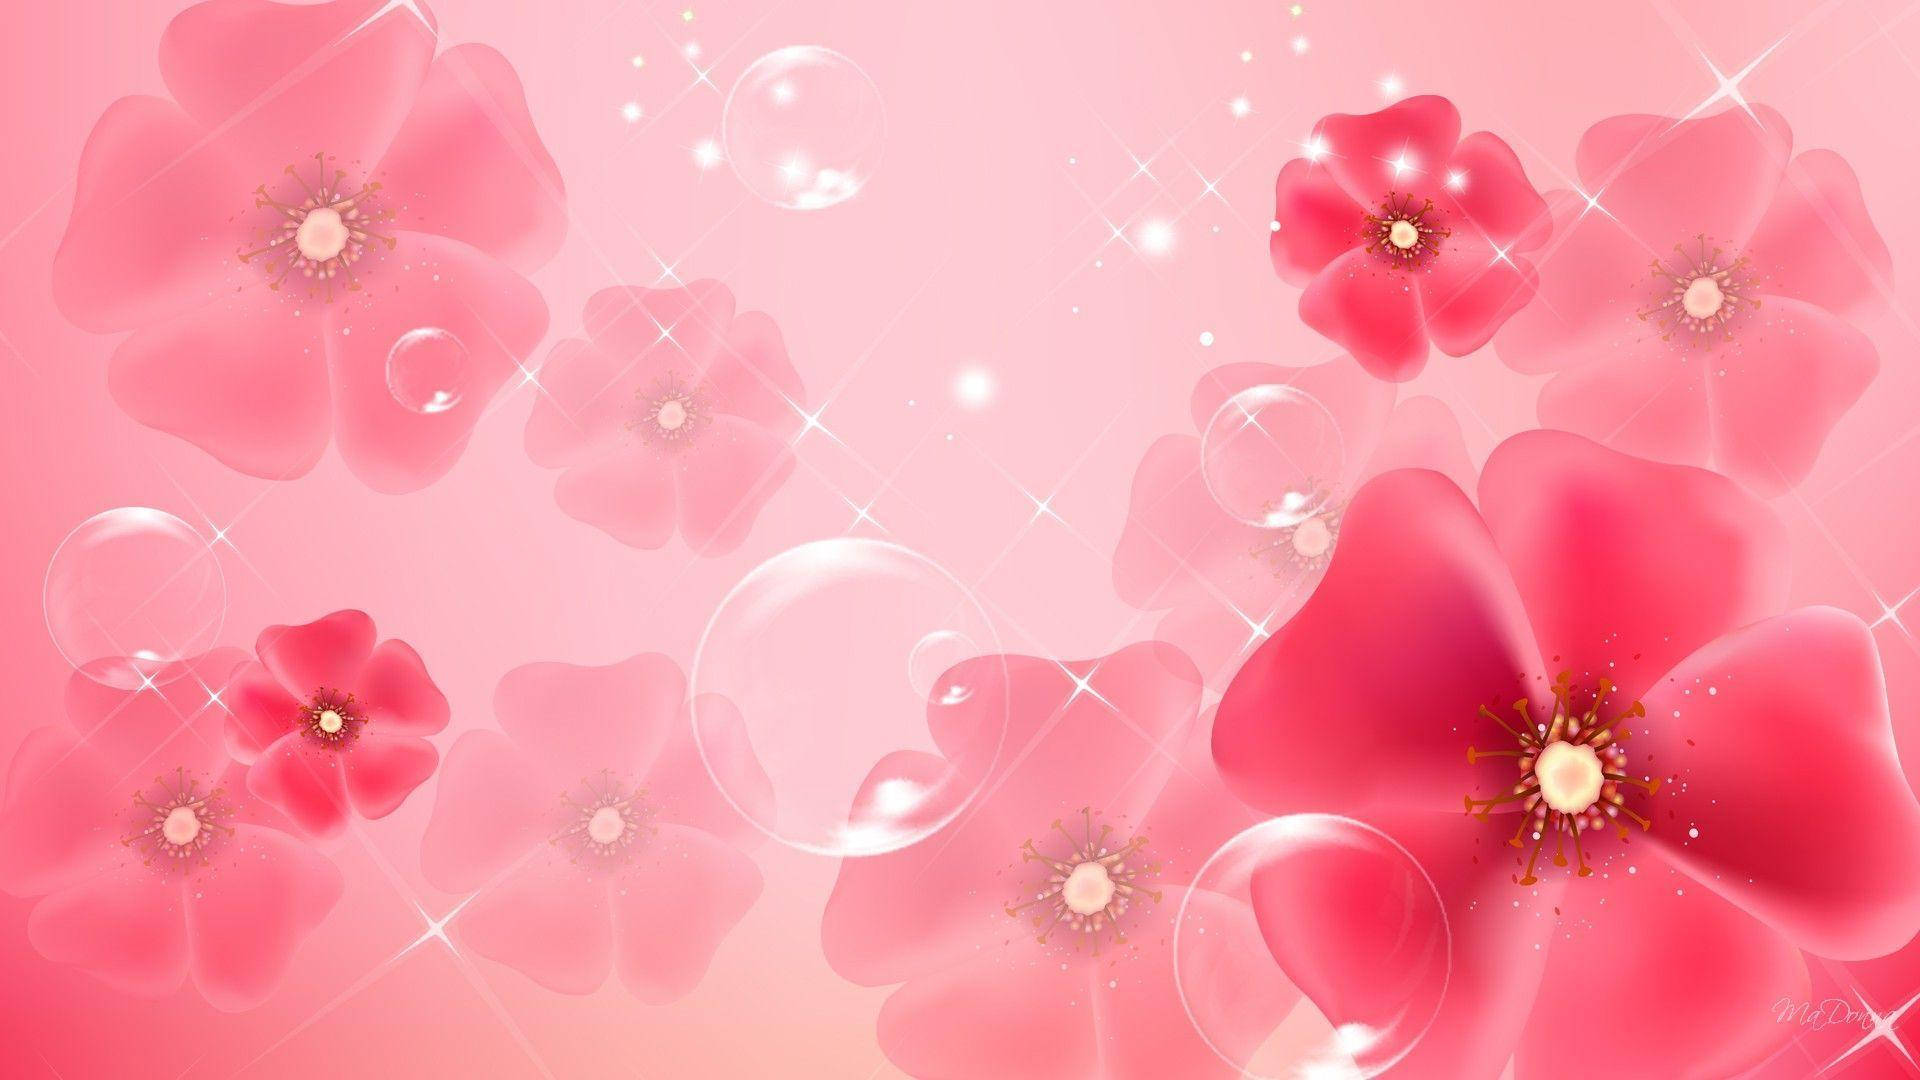 Light Pink Flowers And Bubbles Wallpaper